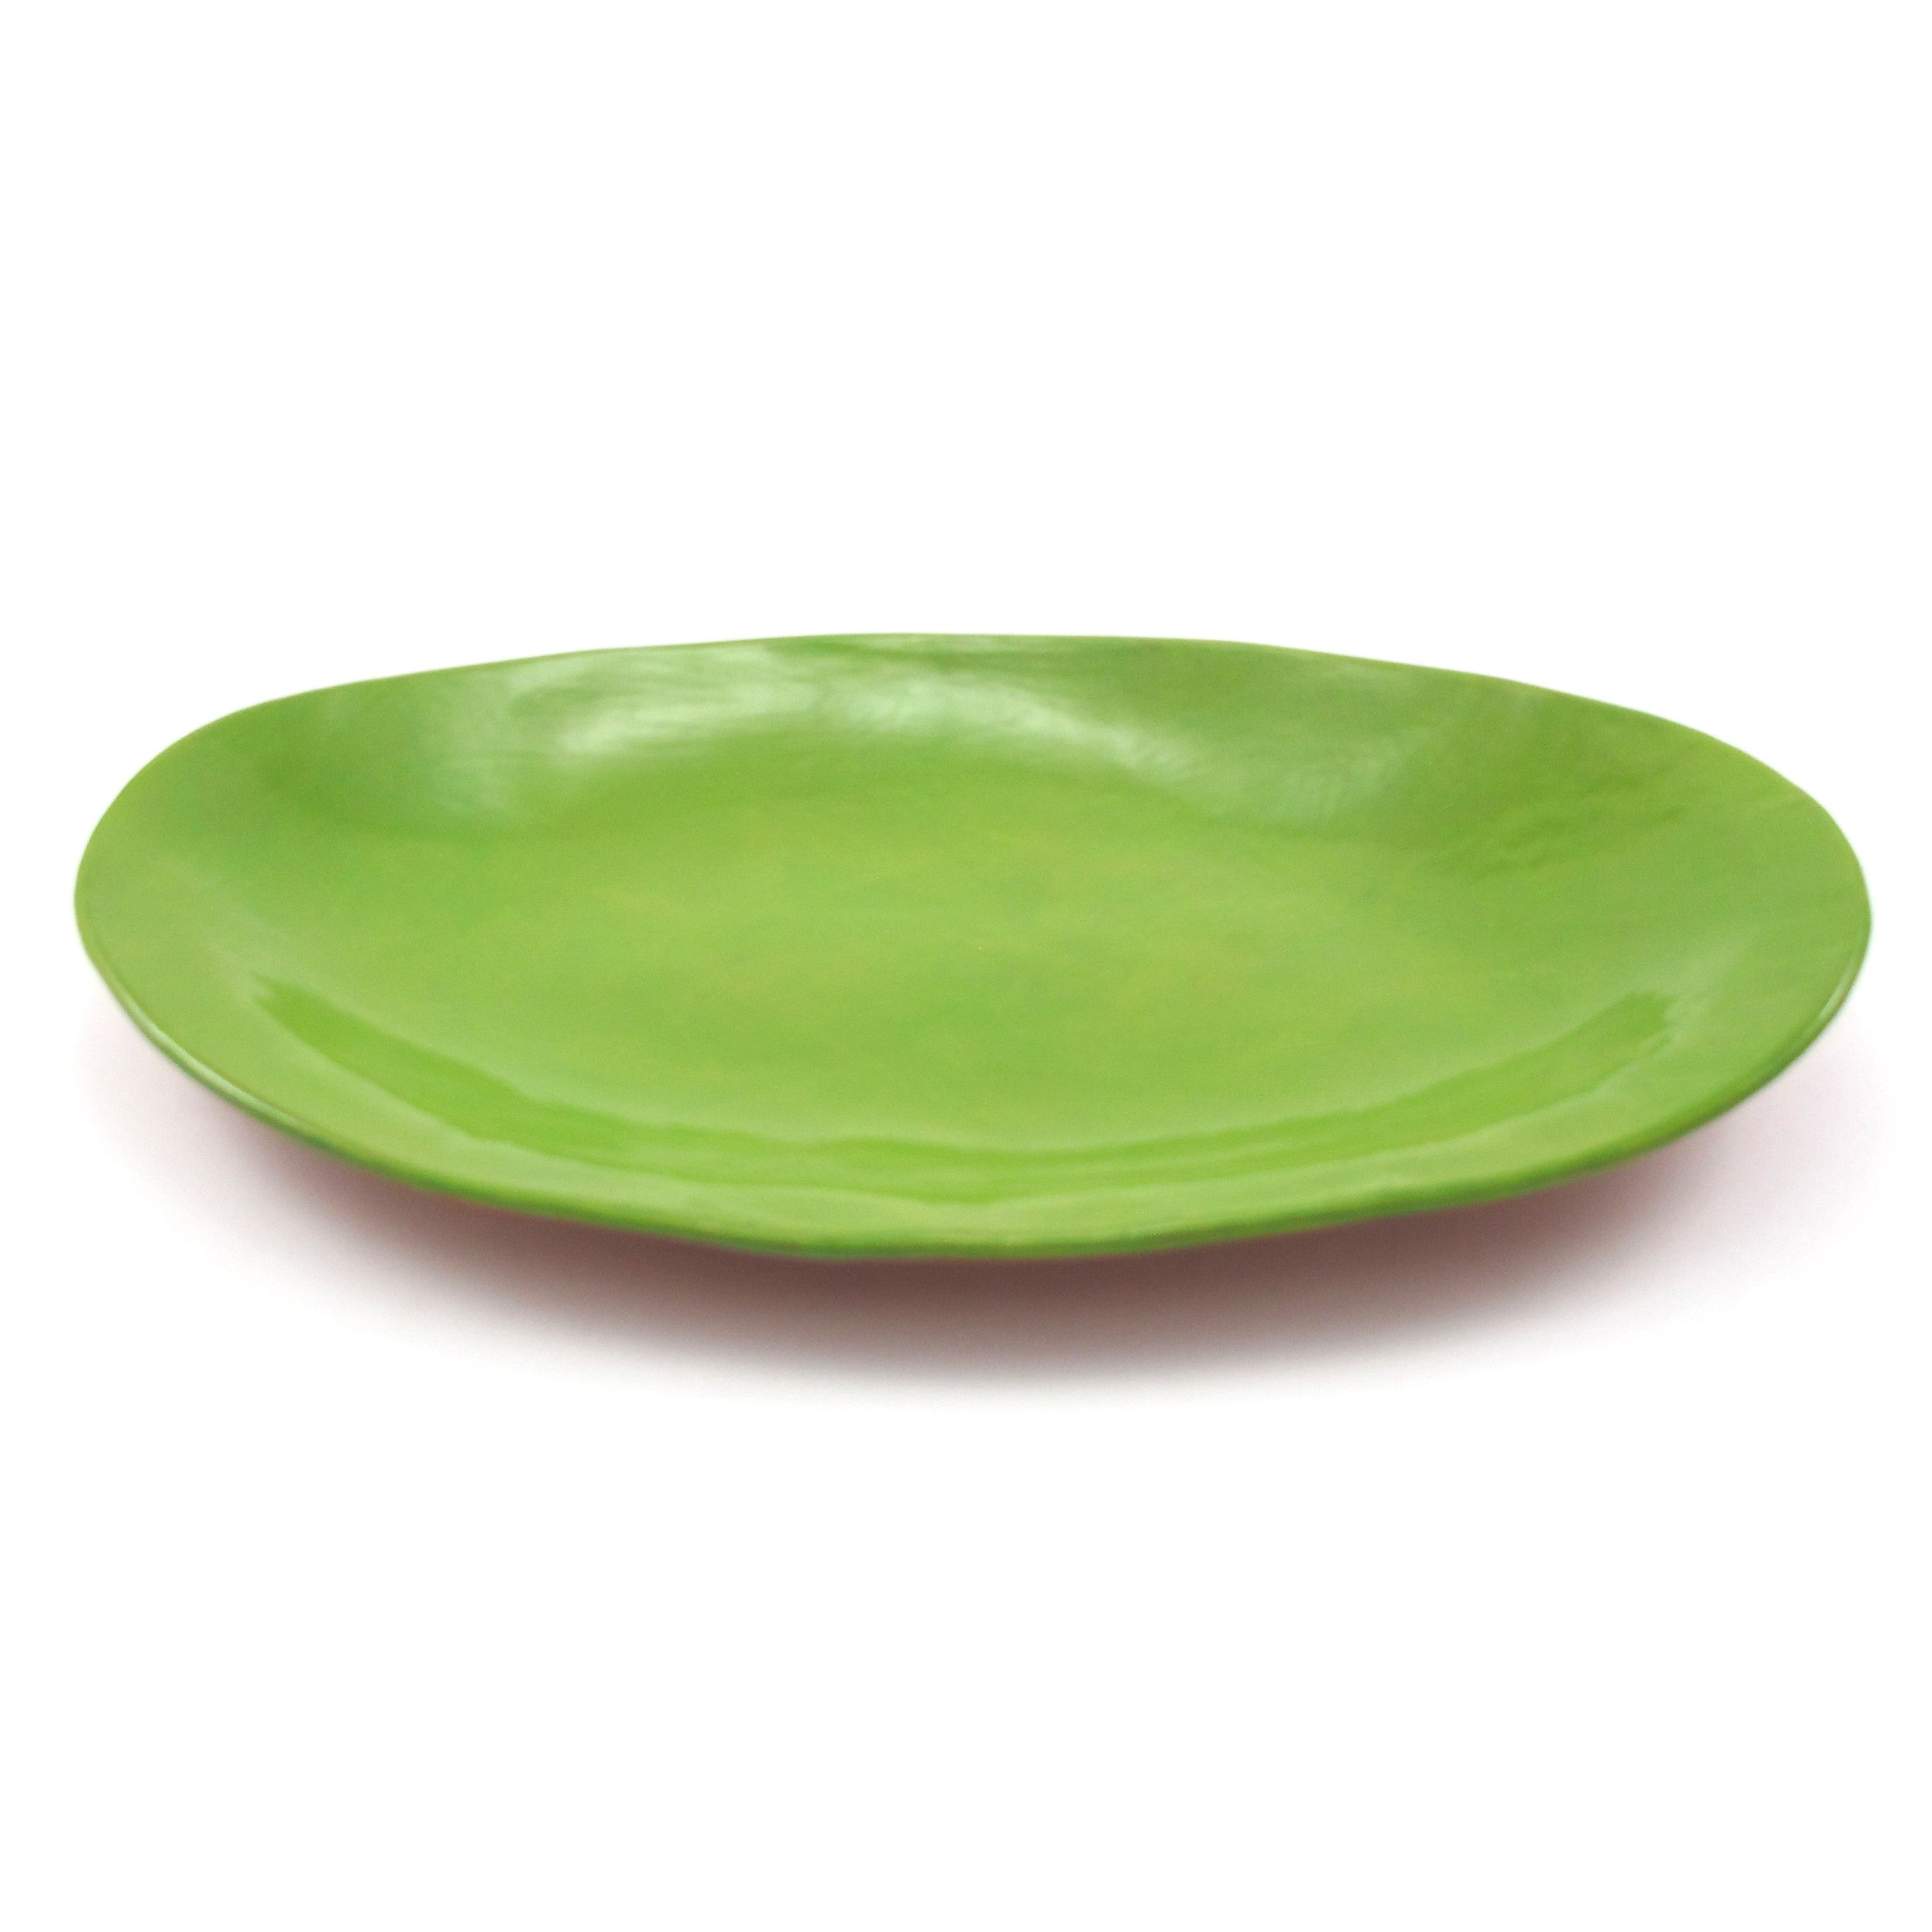 Oval Platter | Made to Order